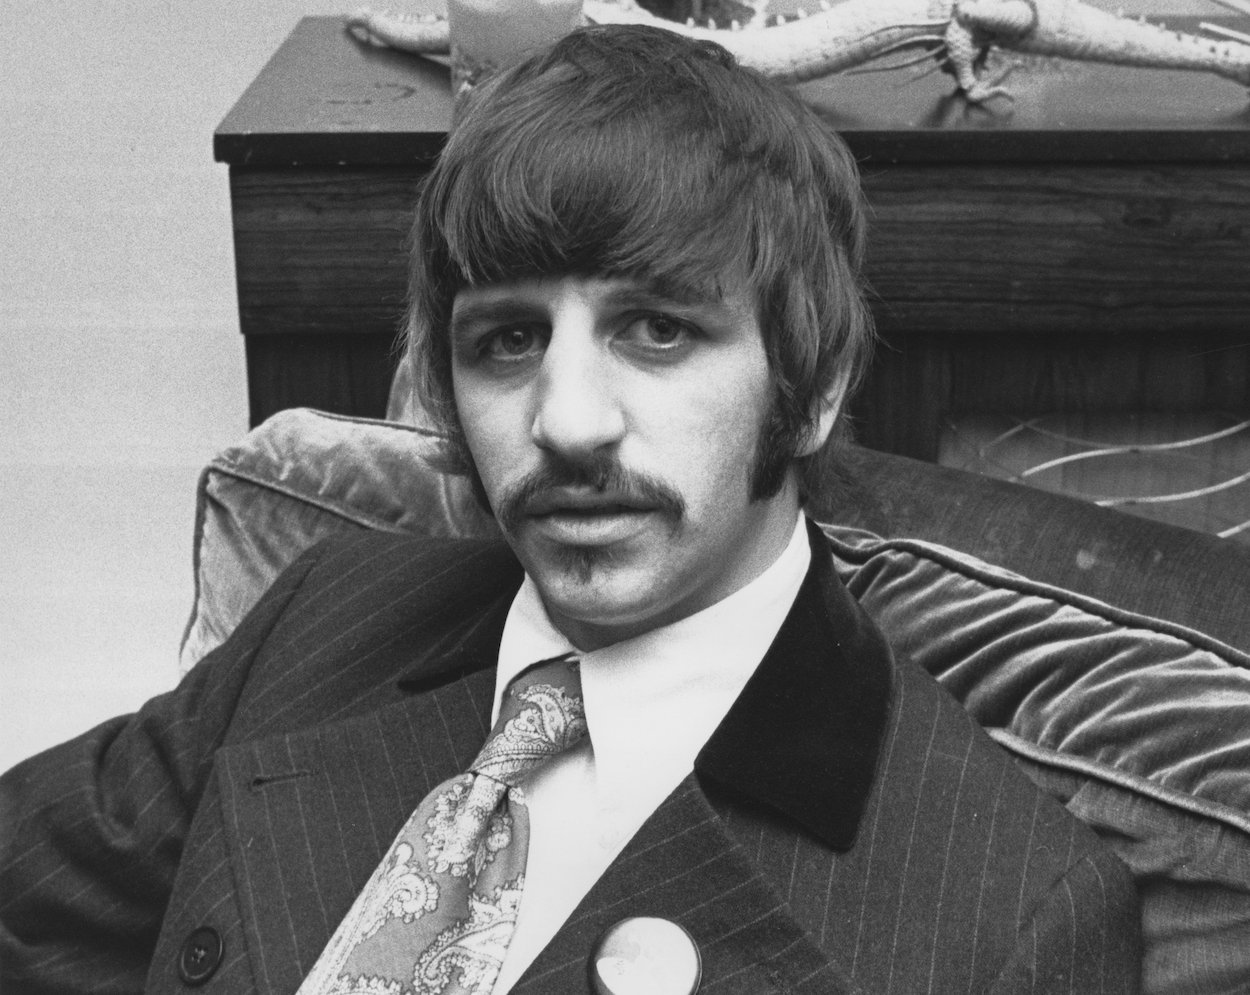 Ringo Starr, who helped give an award-winning musician his big break in the recording industry in 1970, at Beatles manager Brian Epstein's house in 1967.